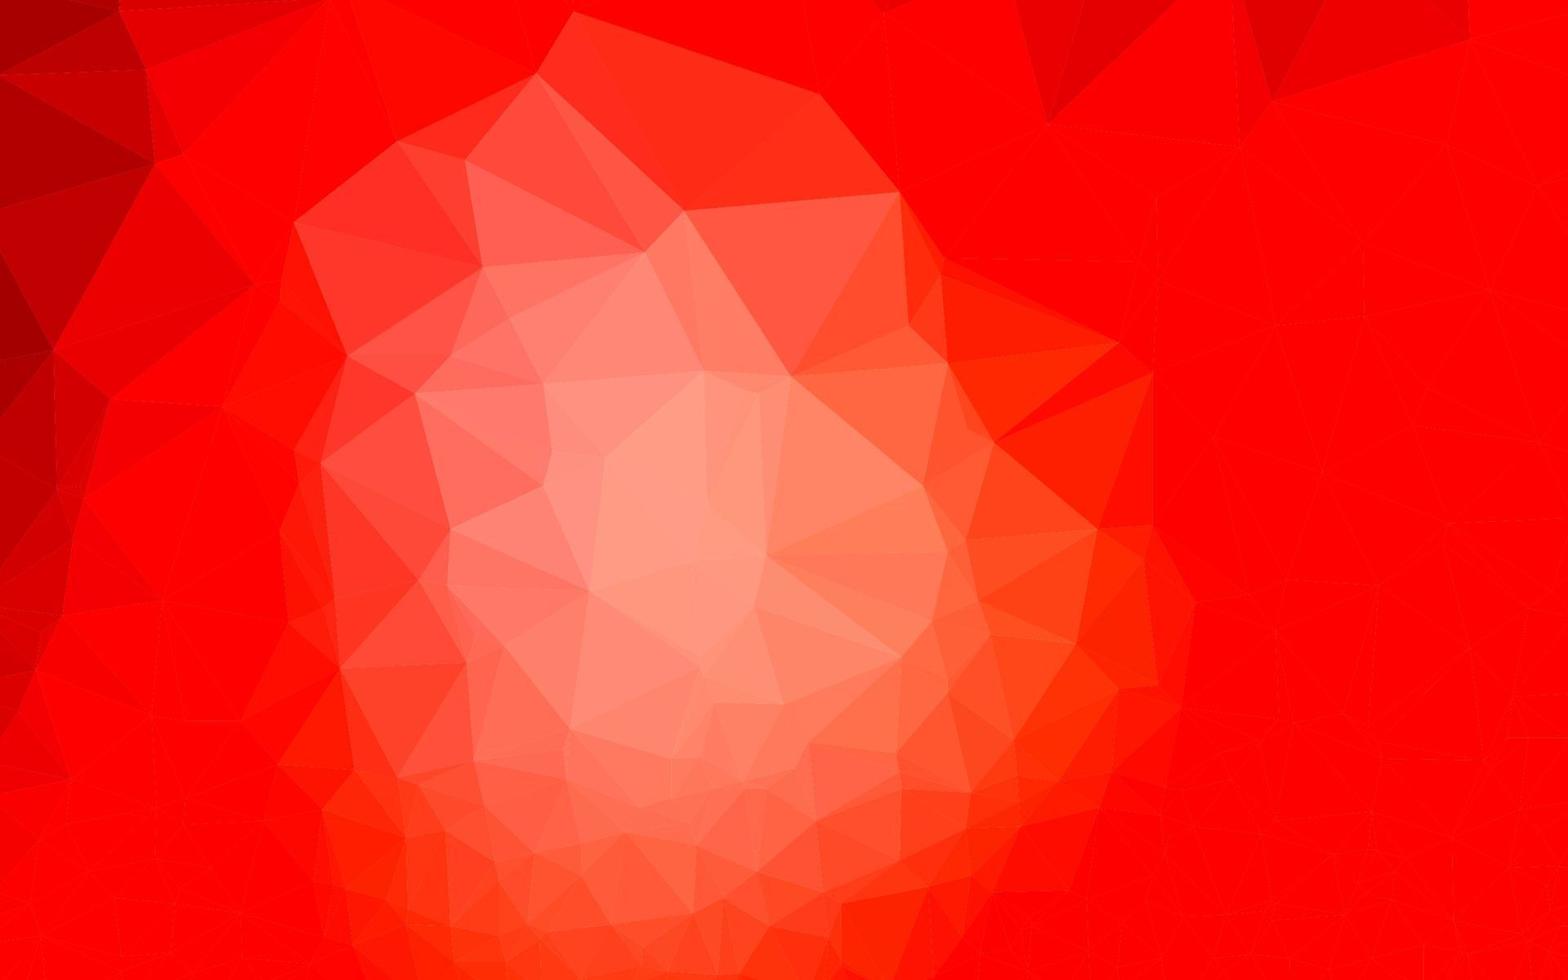 Light Red vector abstract mosaic backdrop.